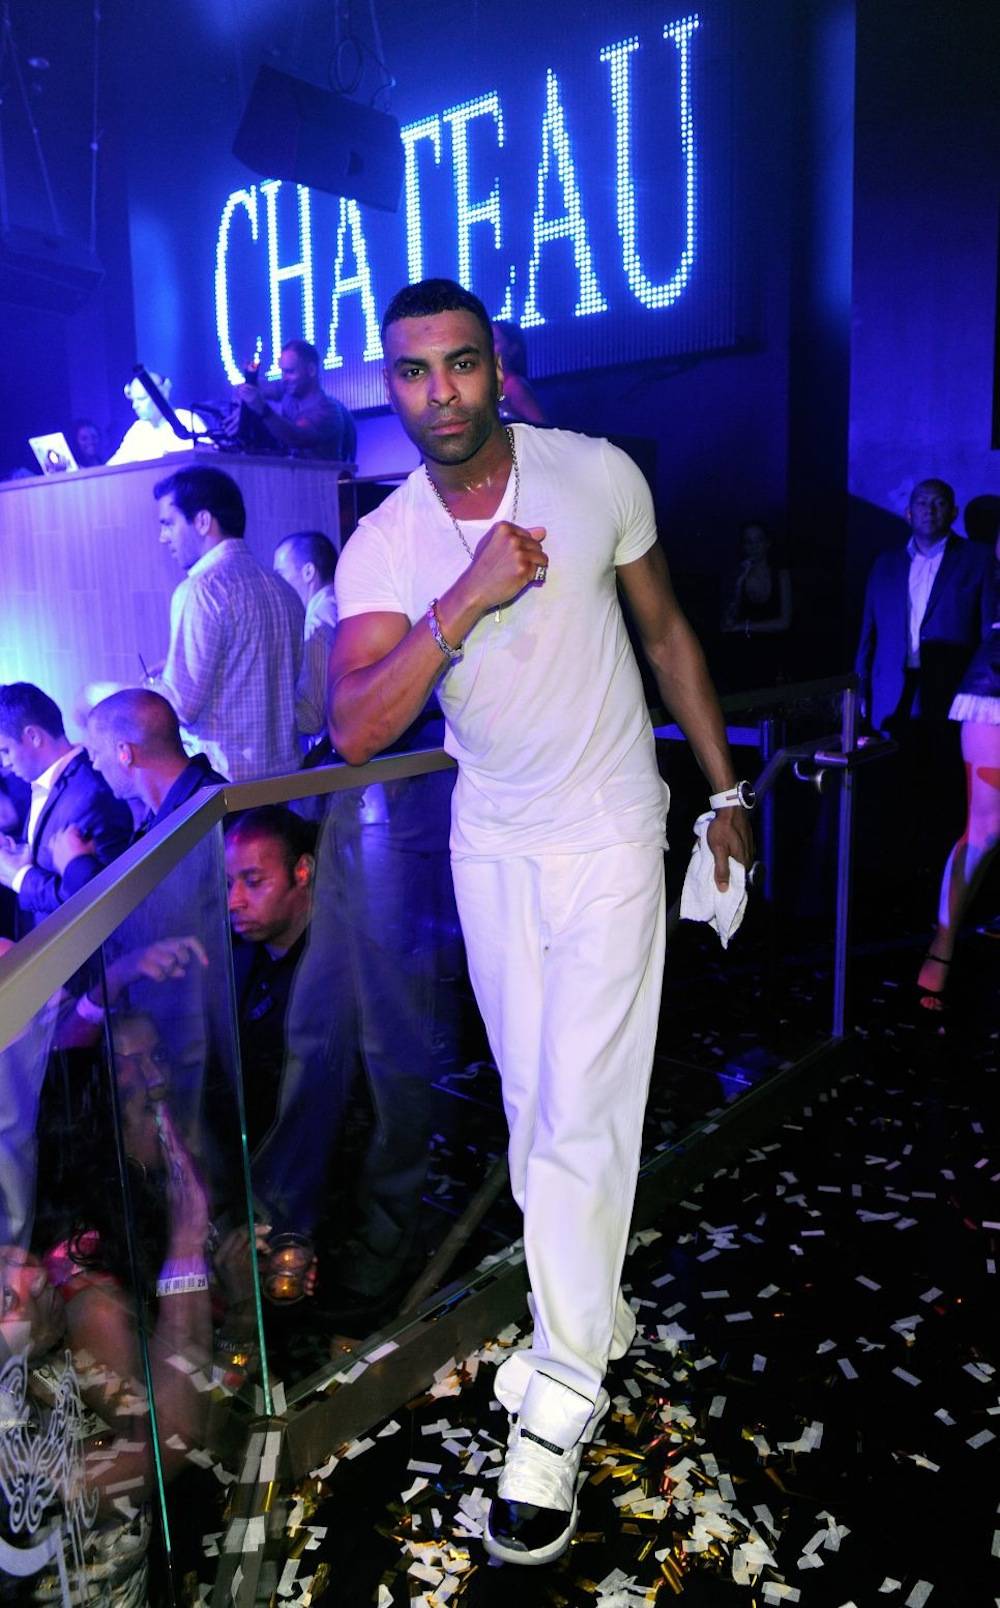 Sultry R&B Lyricist Ginuwine Performs For A Sold Out Crowd At Chateau Nightclub & Gardens During Labor Day Weekend